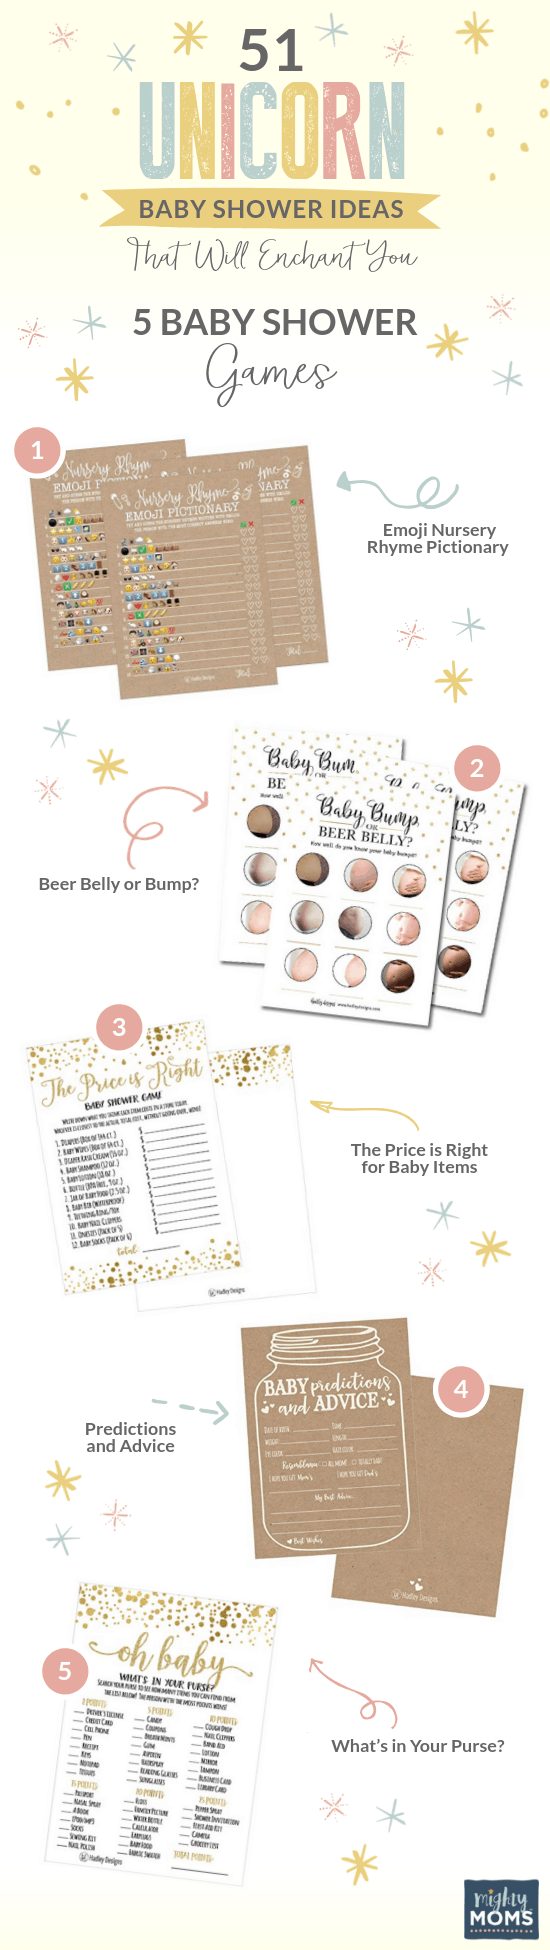 Unique Unicorn Baby Shower Games to Play - MightyMoms.club